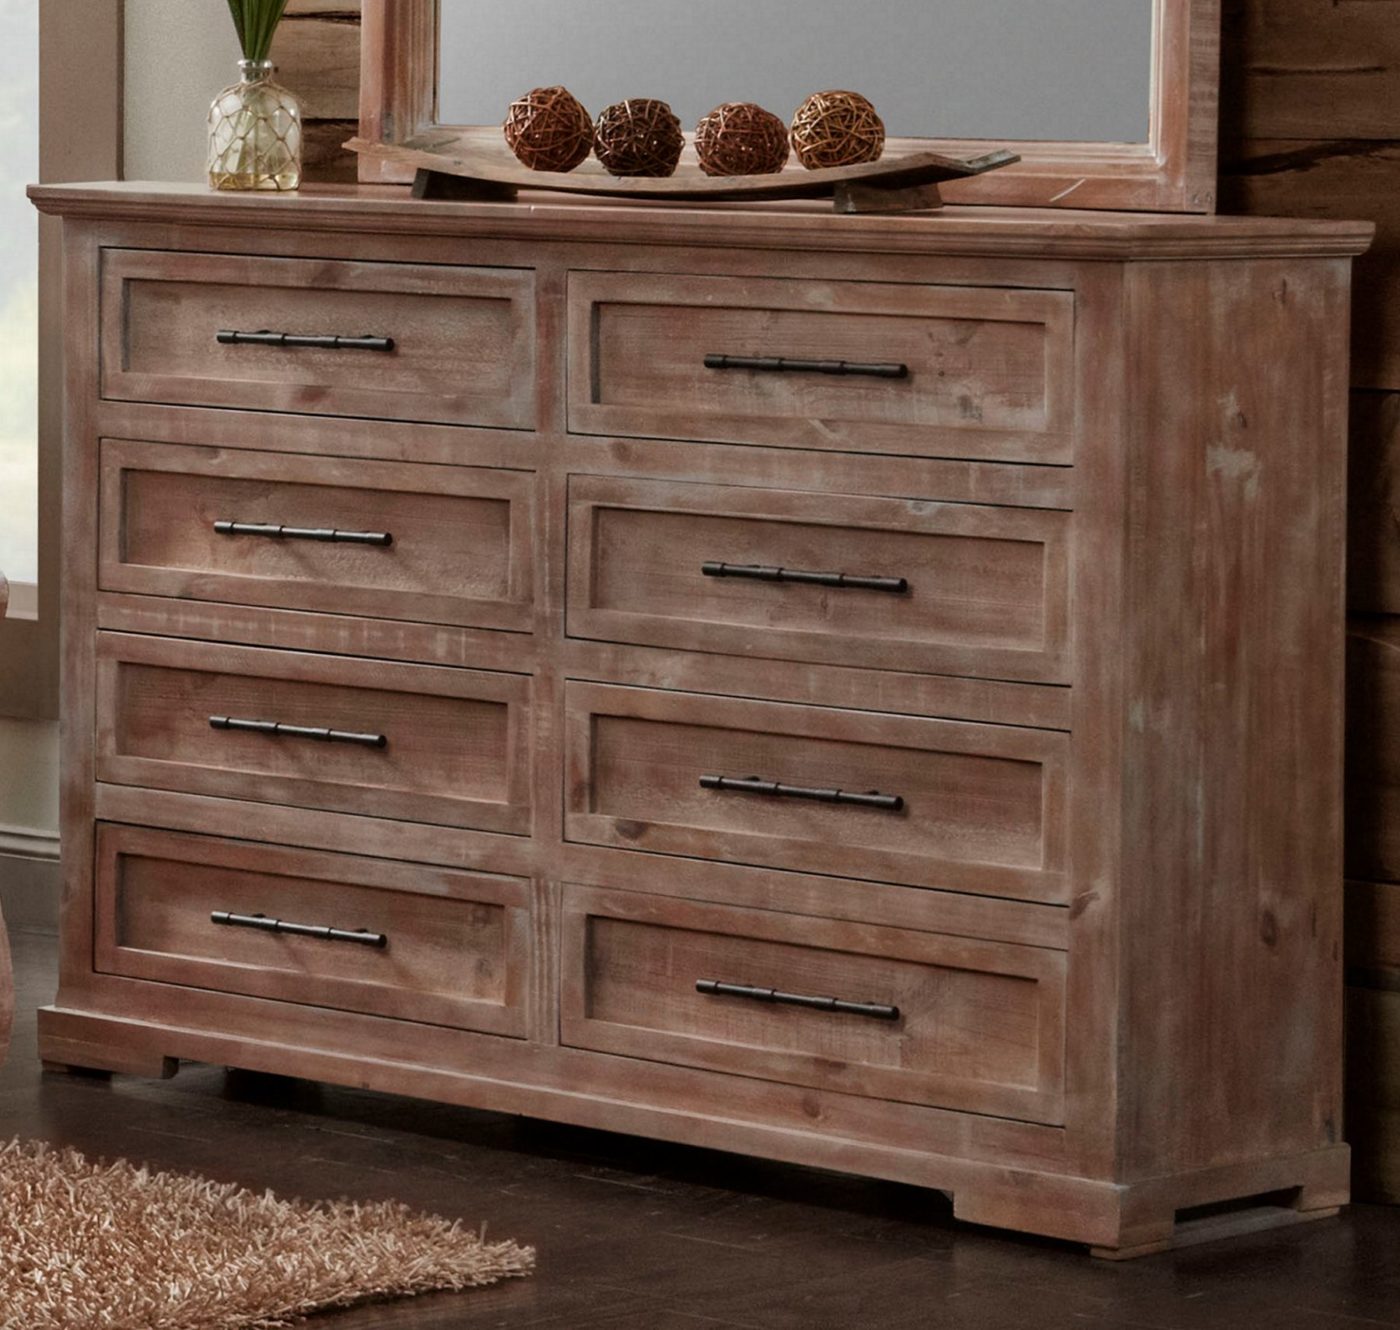 brown chest of drawers